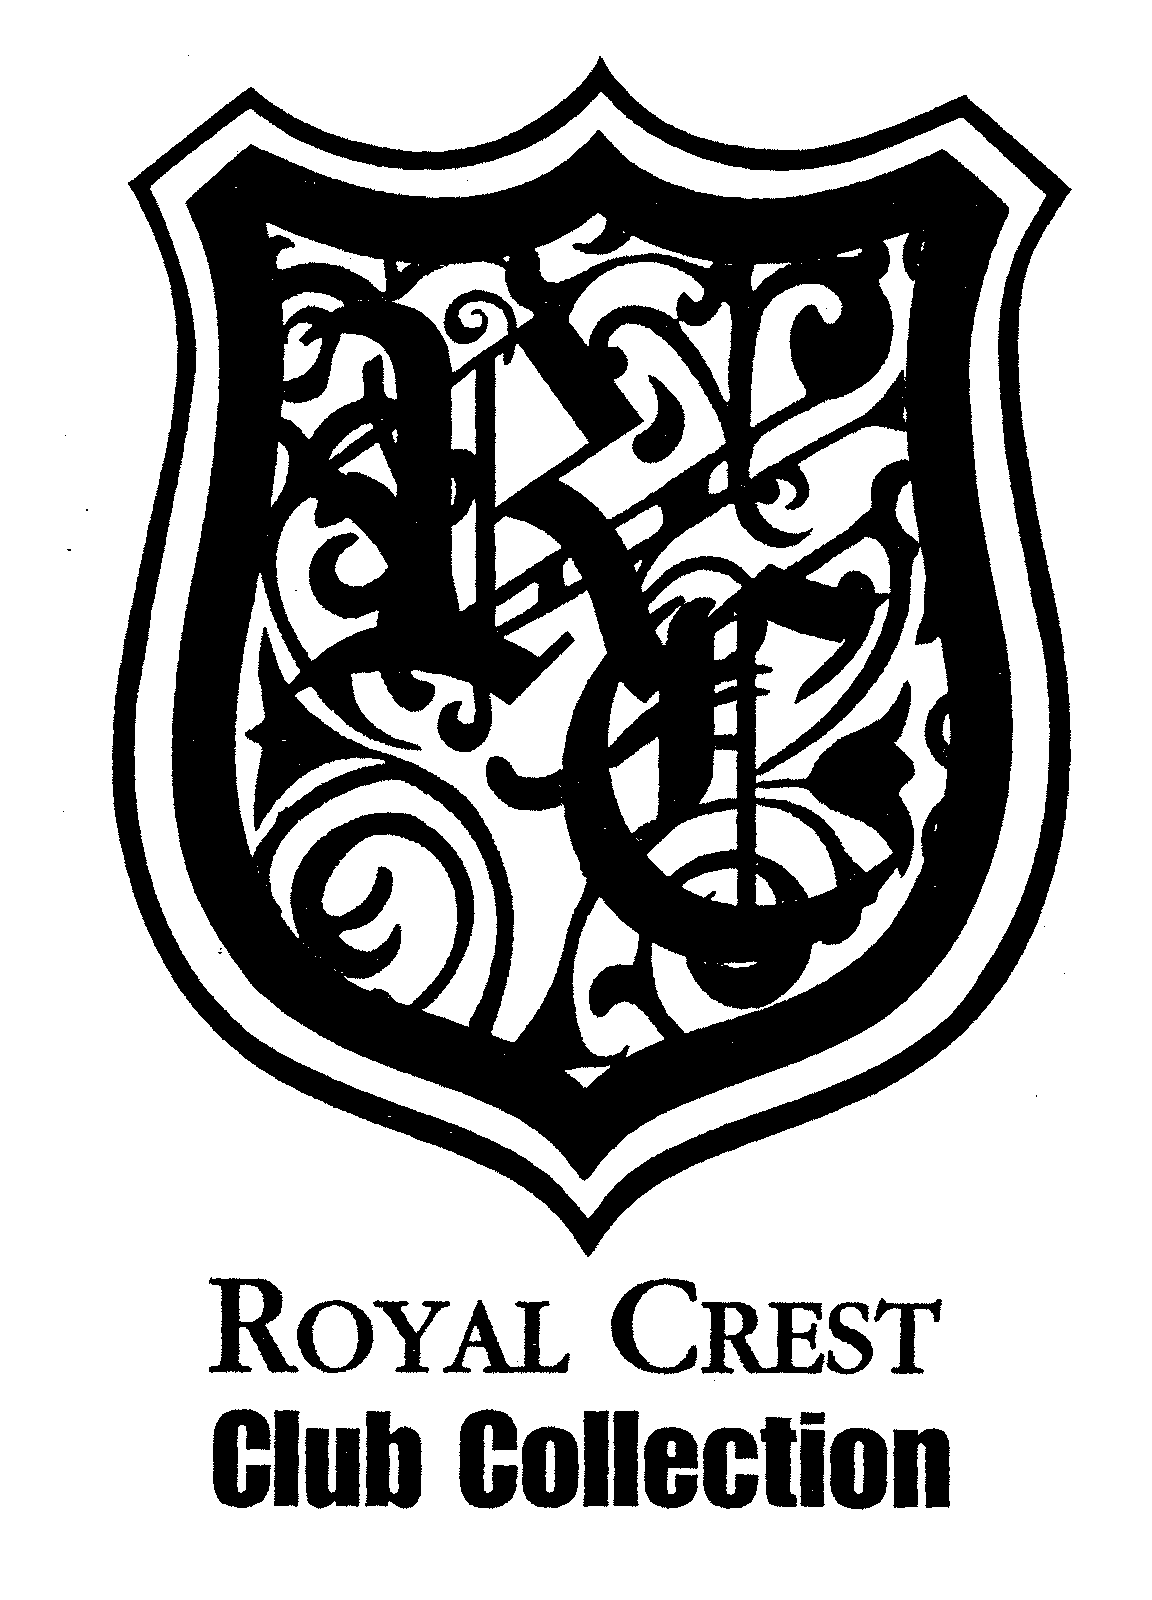  RC ROYAL CREST CLUB COLLECTION